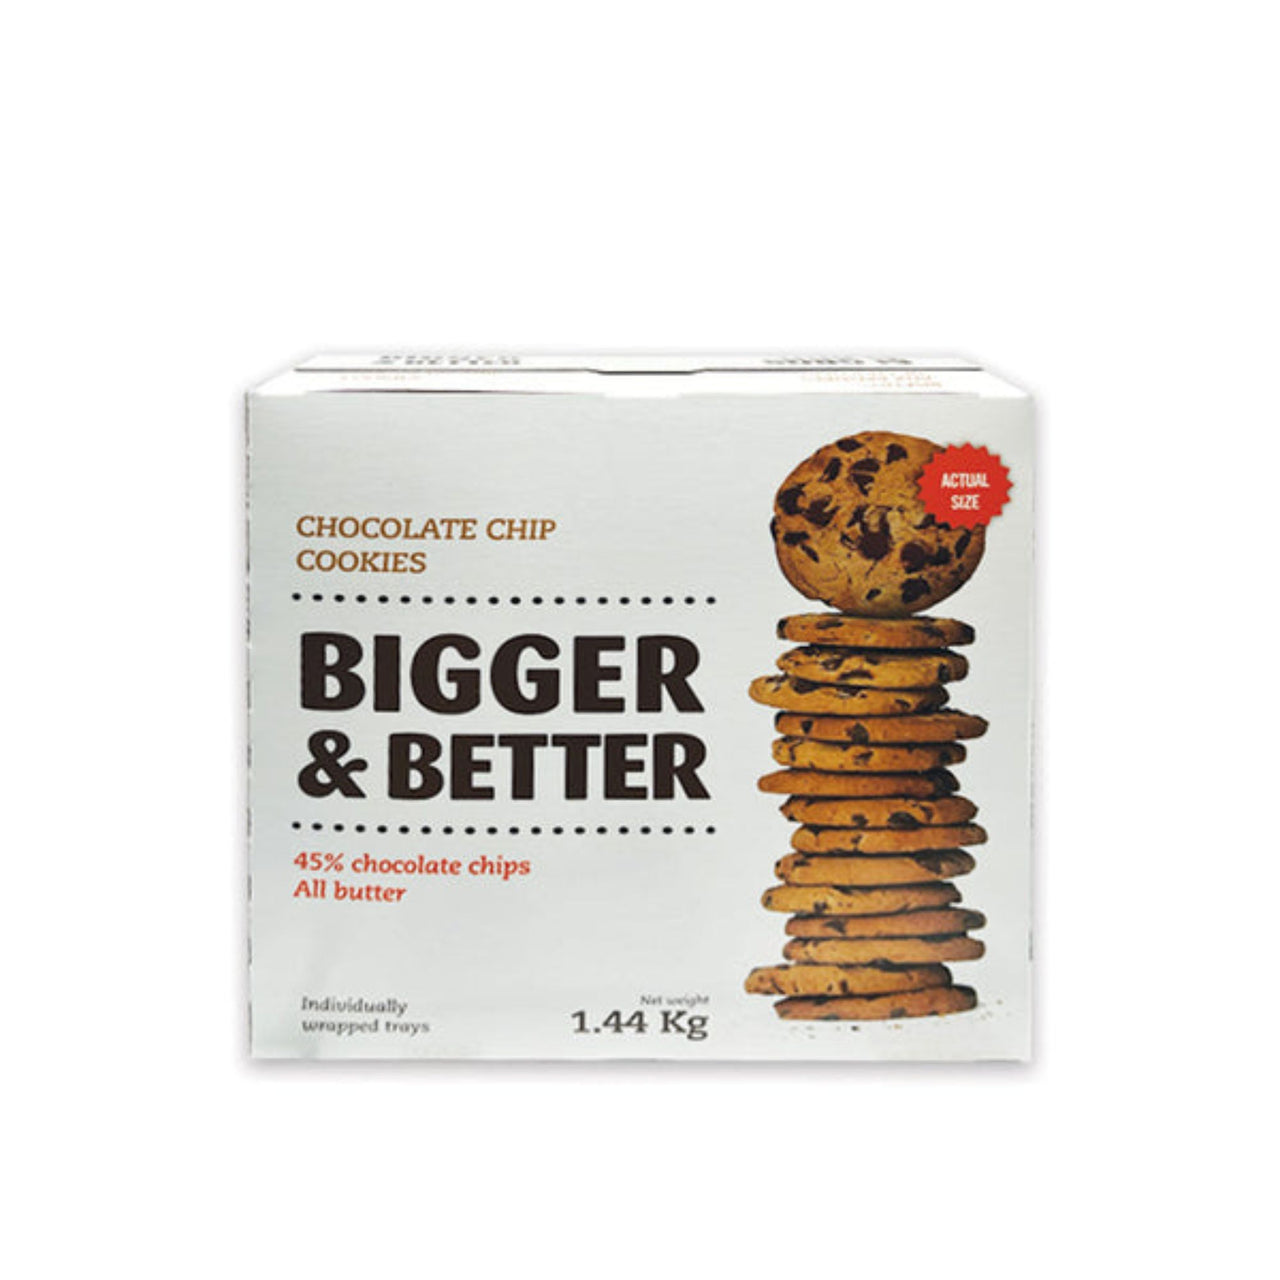 Image of Bigger & Better Chocolate Chip Cookies 1.44kg